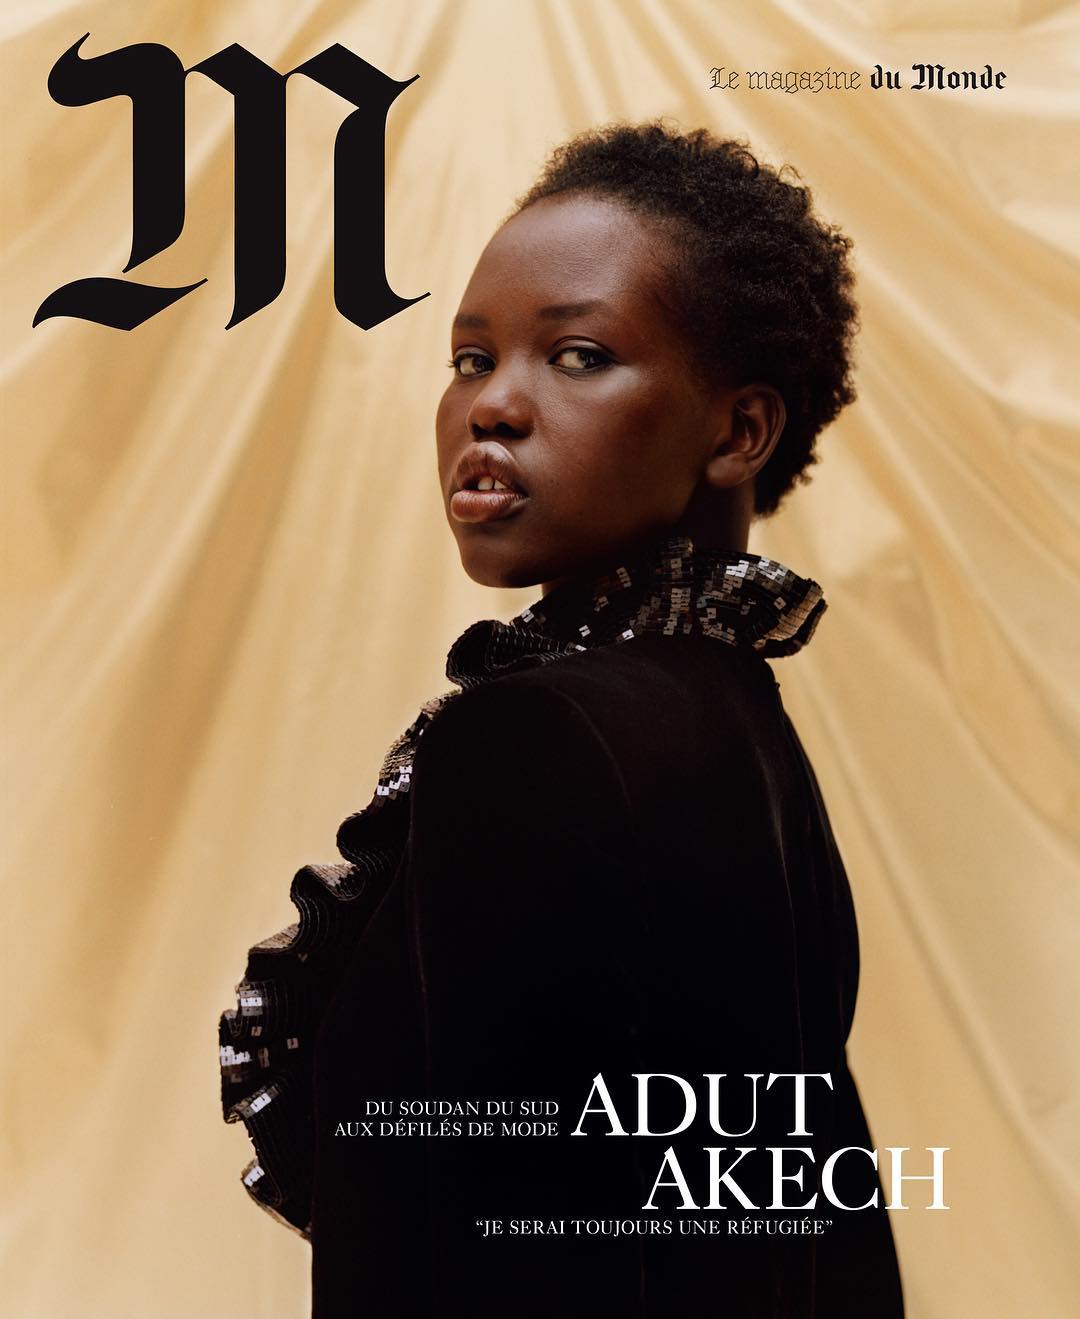 From Refugee Camps to Big Runways – Adut Akech headlines Le Monde Magazine’s New Issue